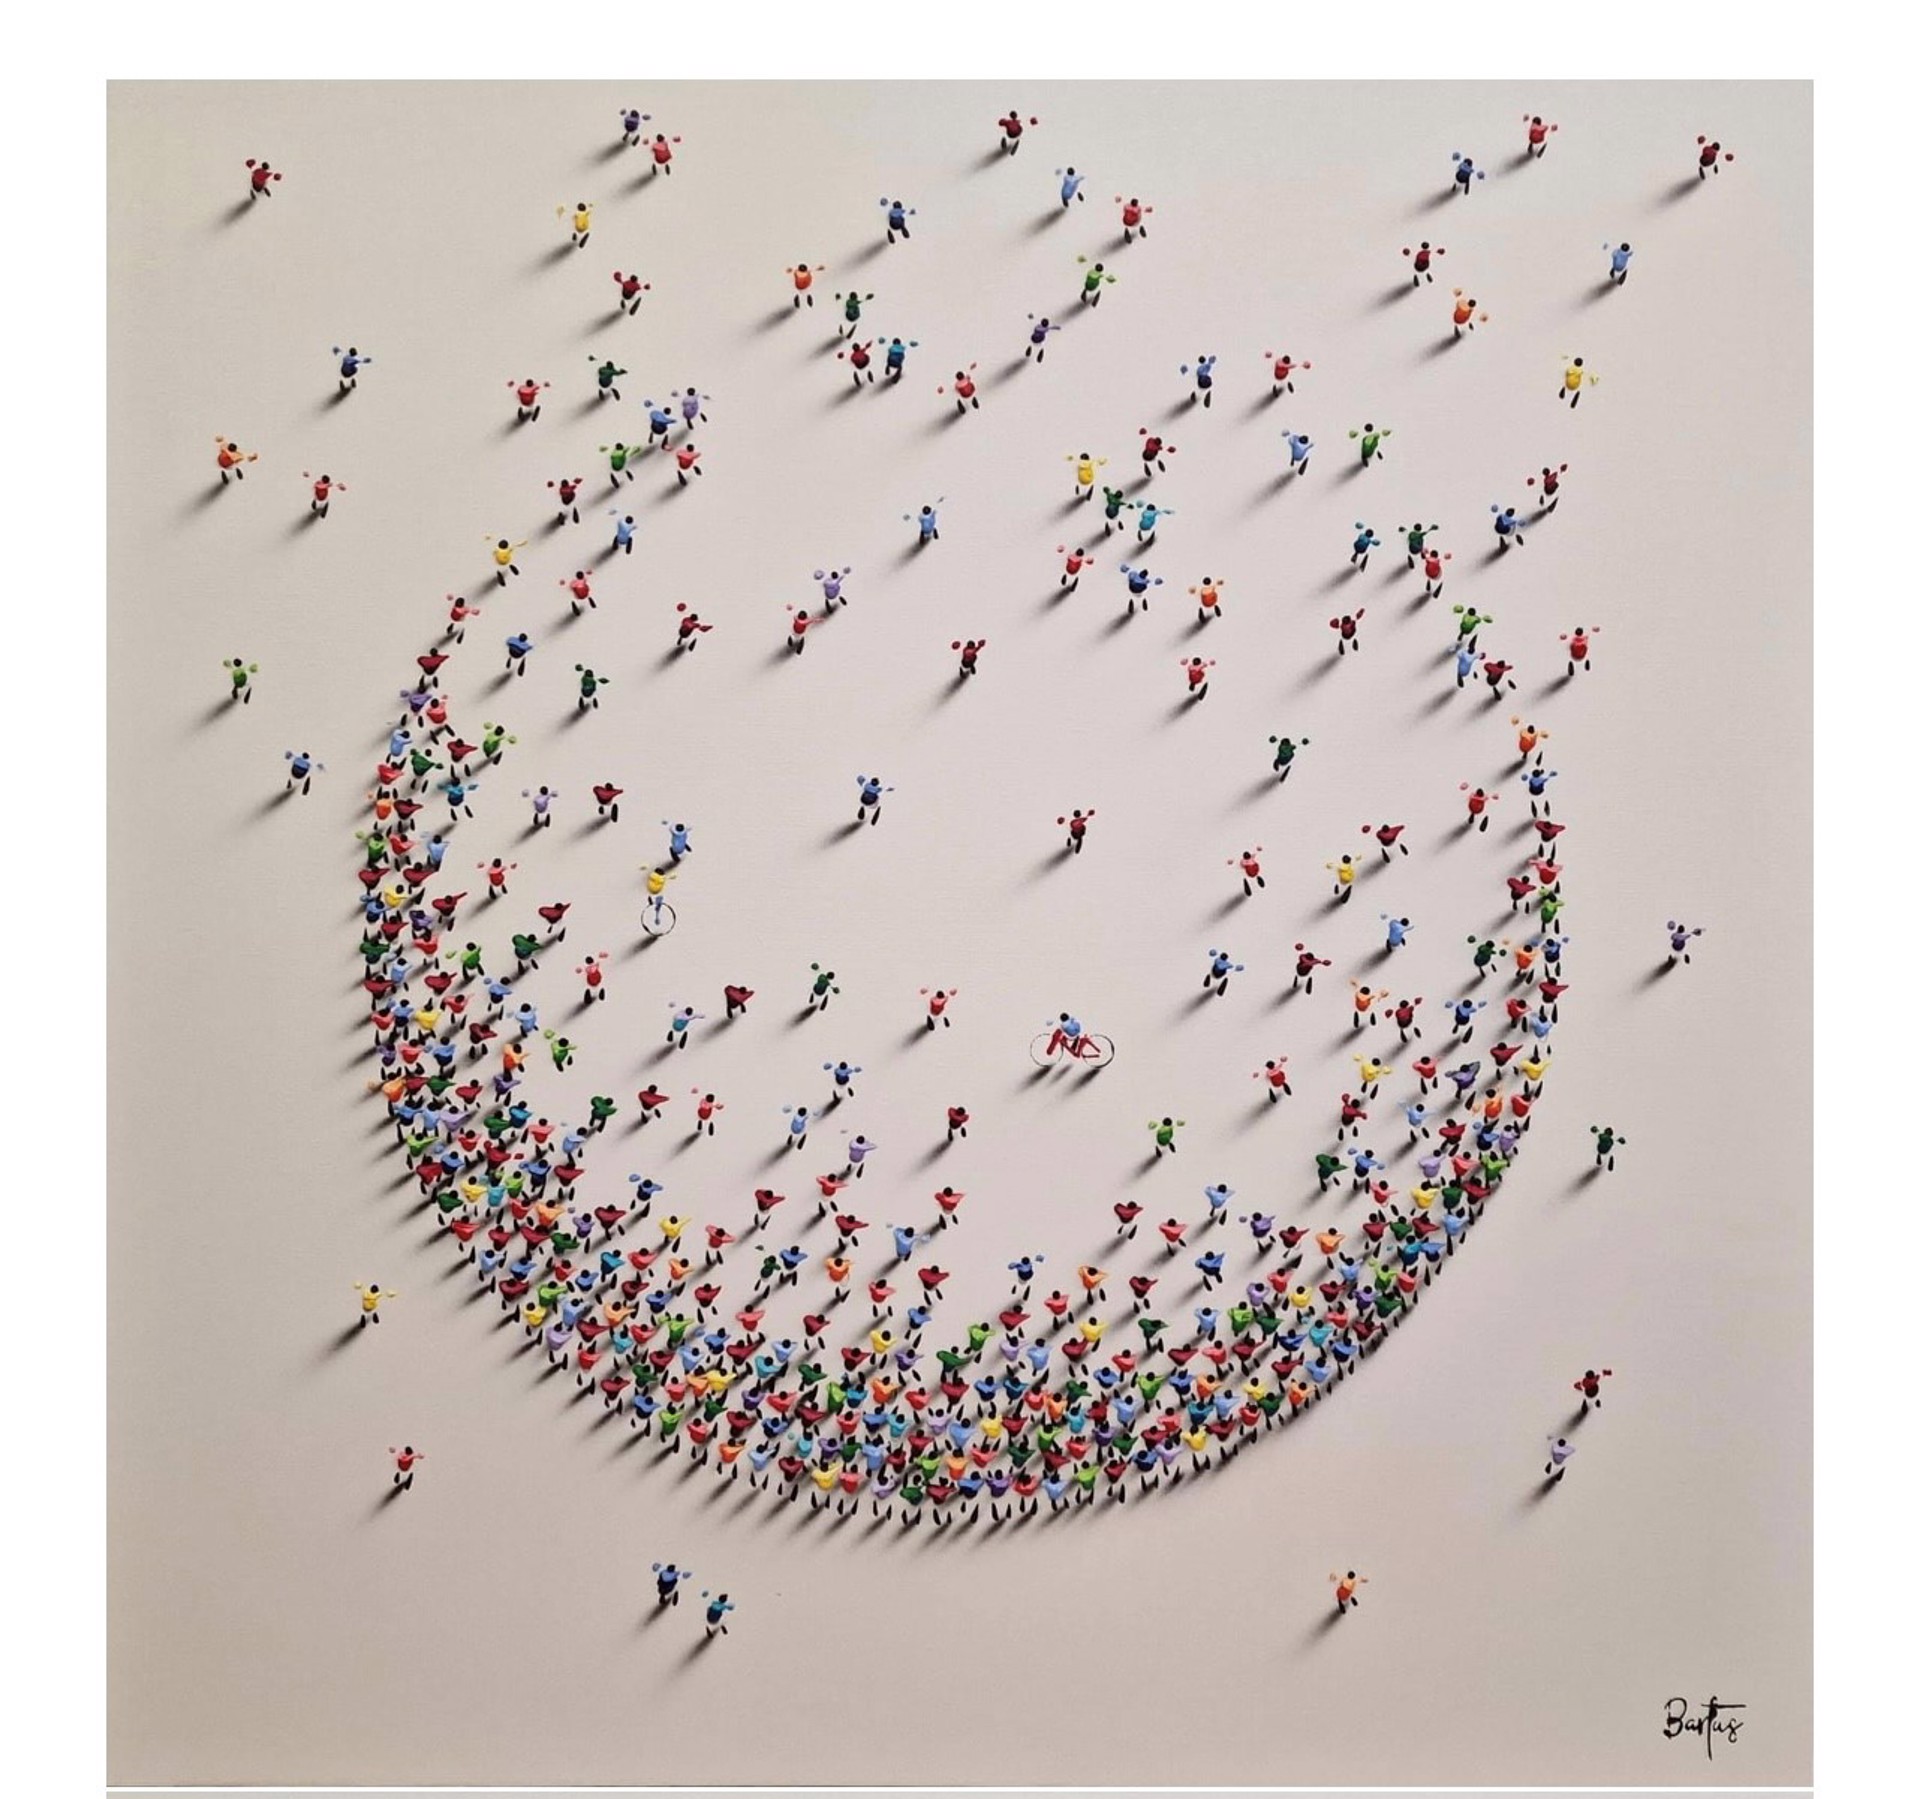 CIRCLE with a few bikes Commission by Francisco Bartus